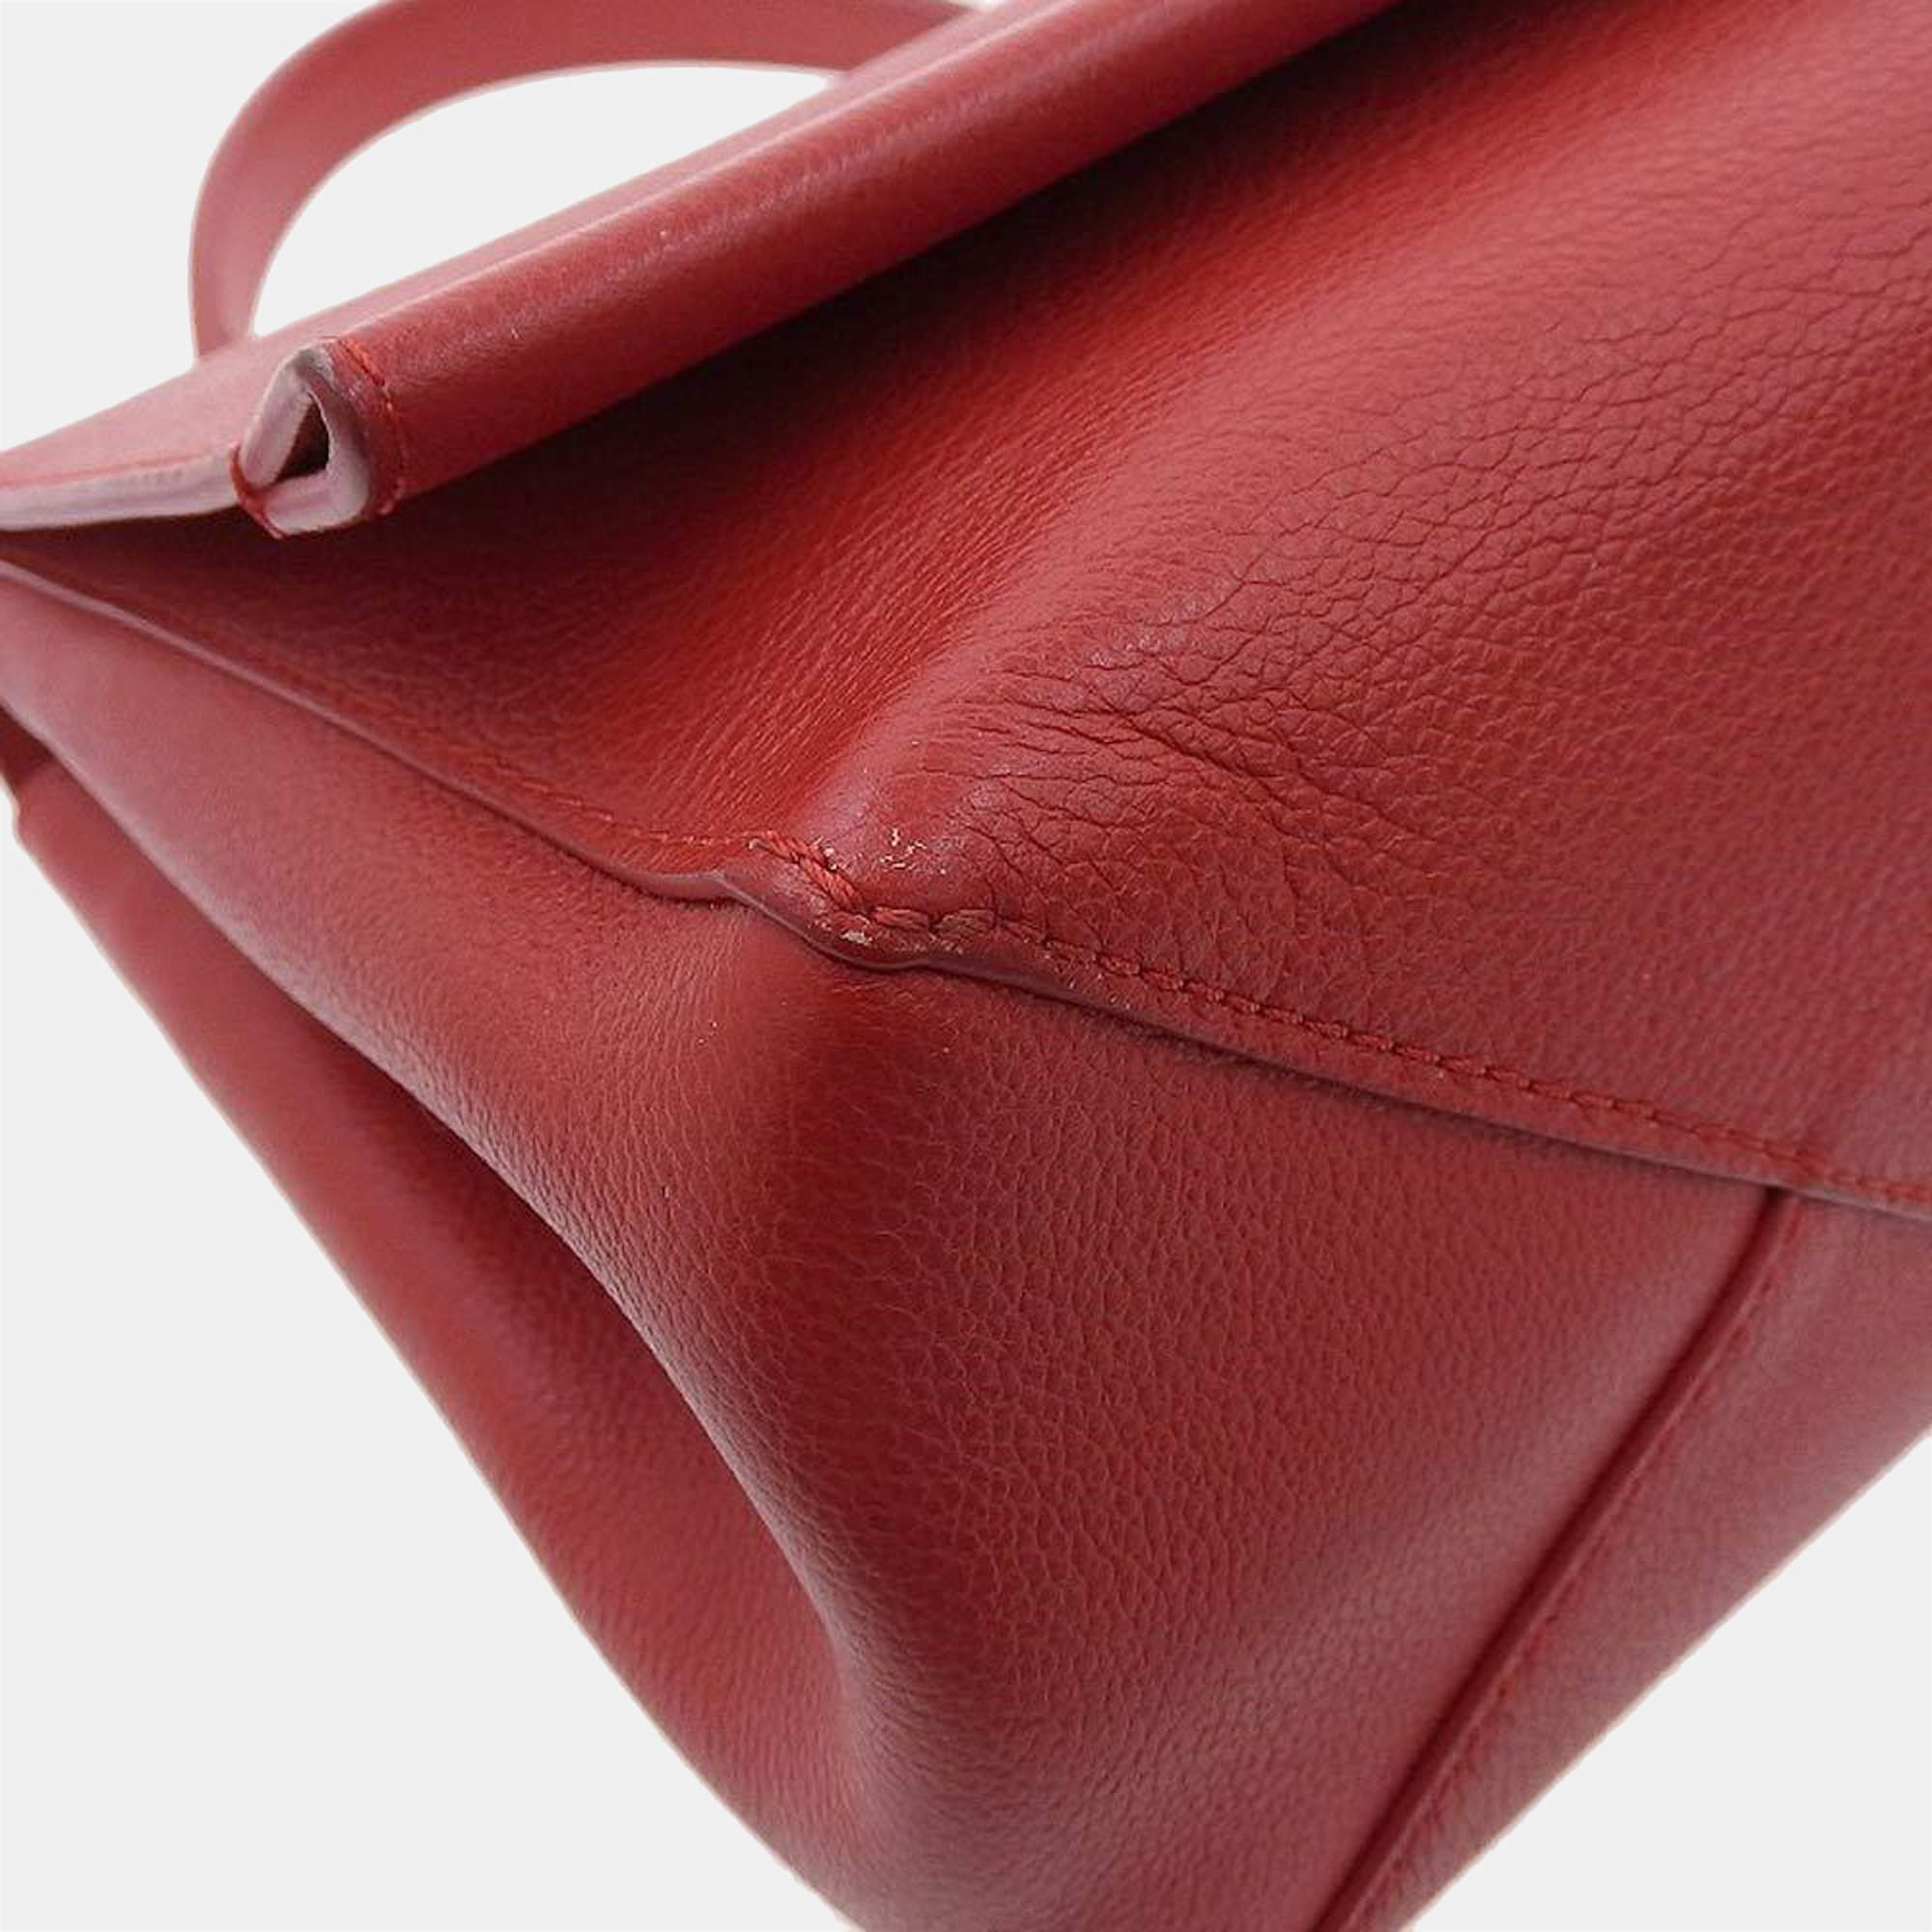 Lockme leather handbag Louis Vuitton Red in Leather - 17239157